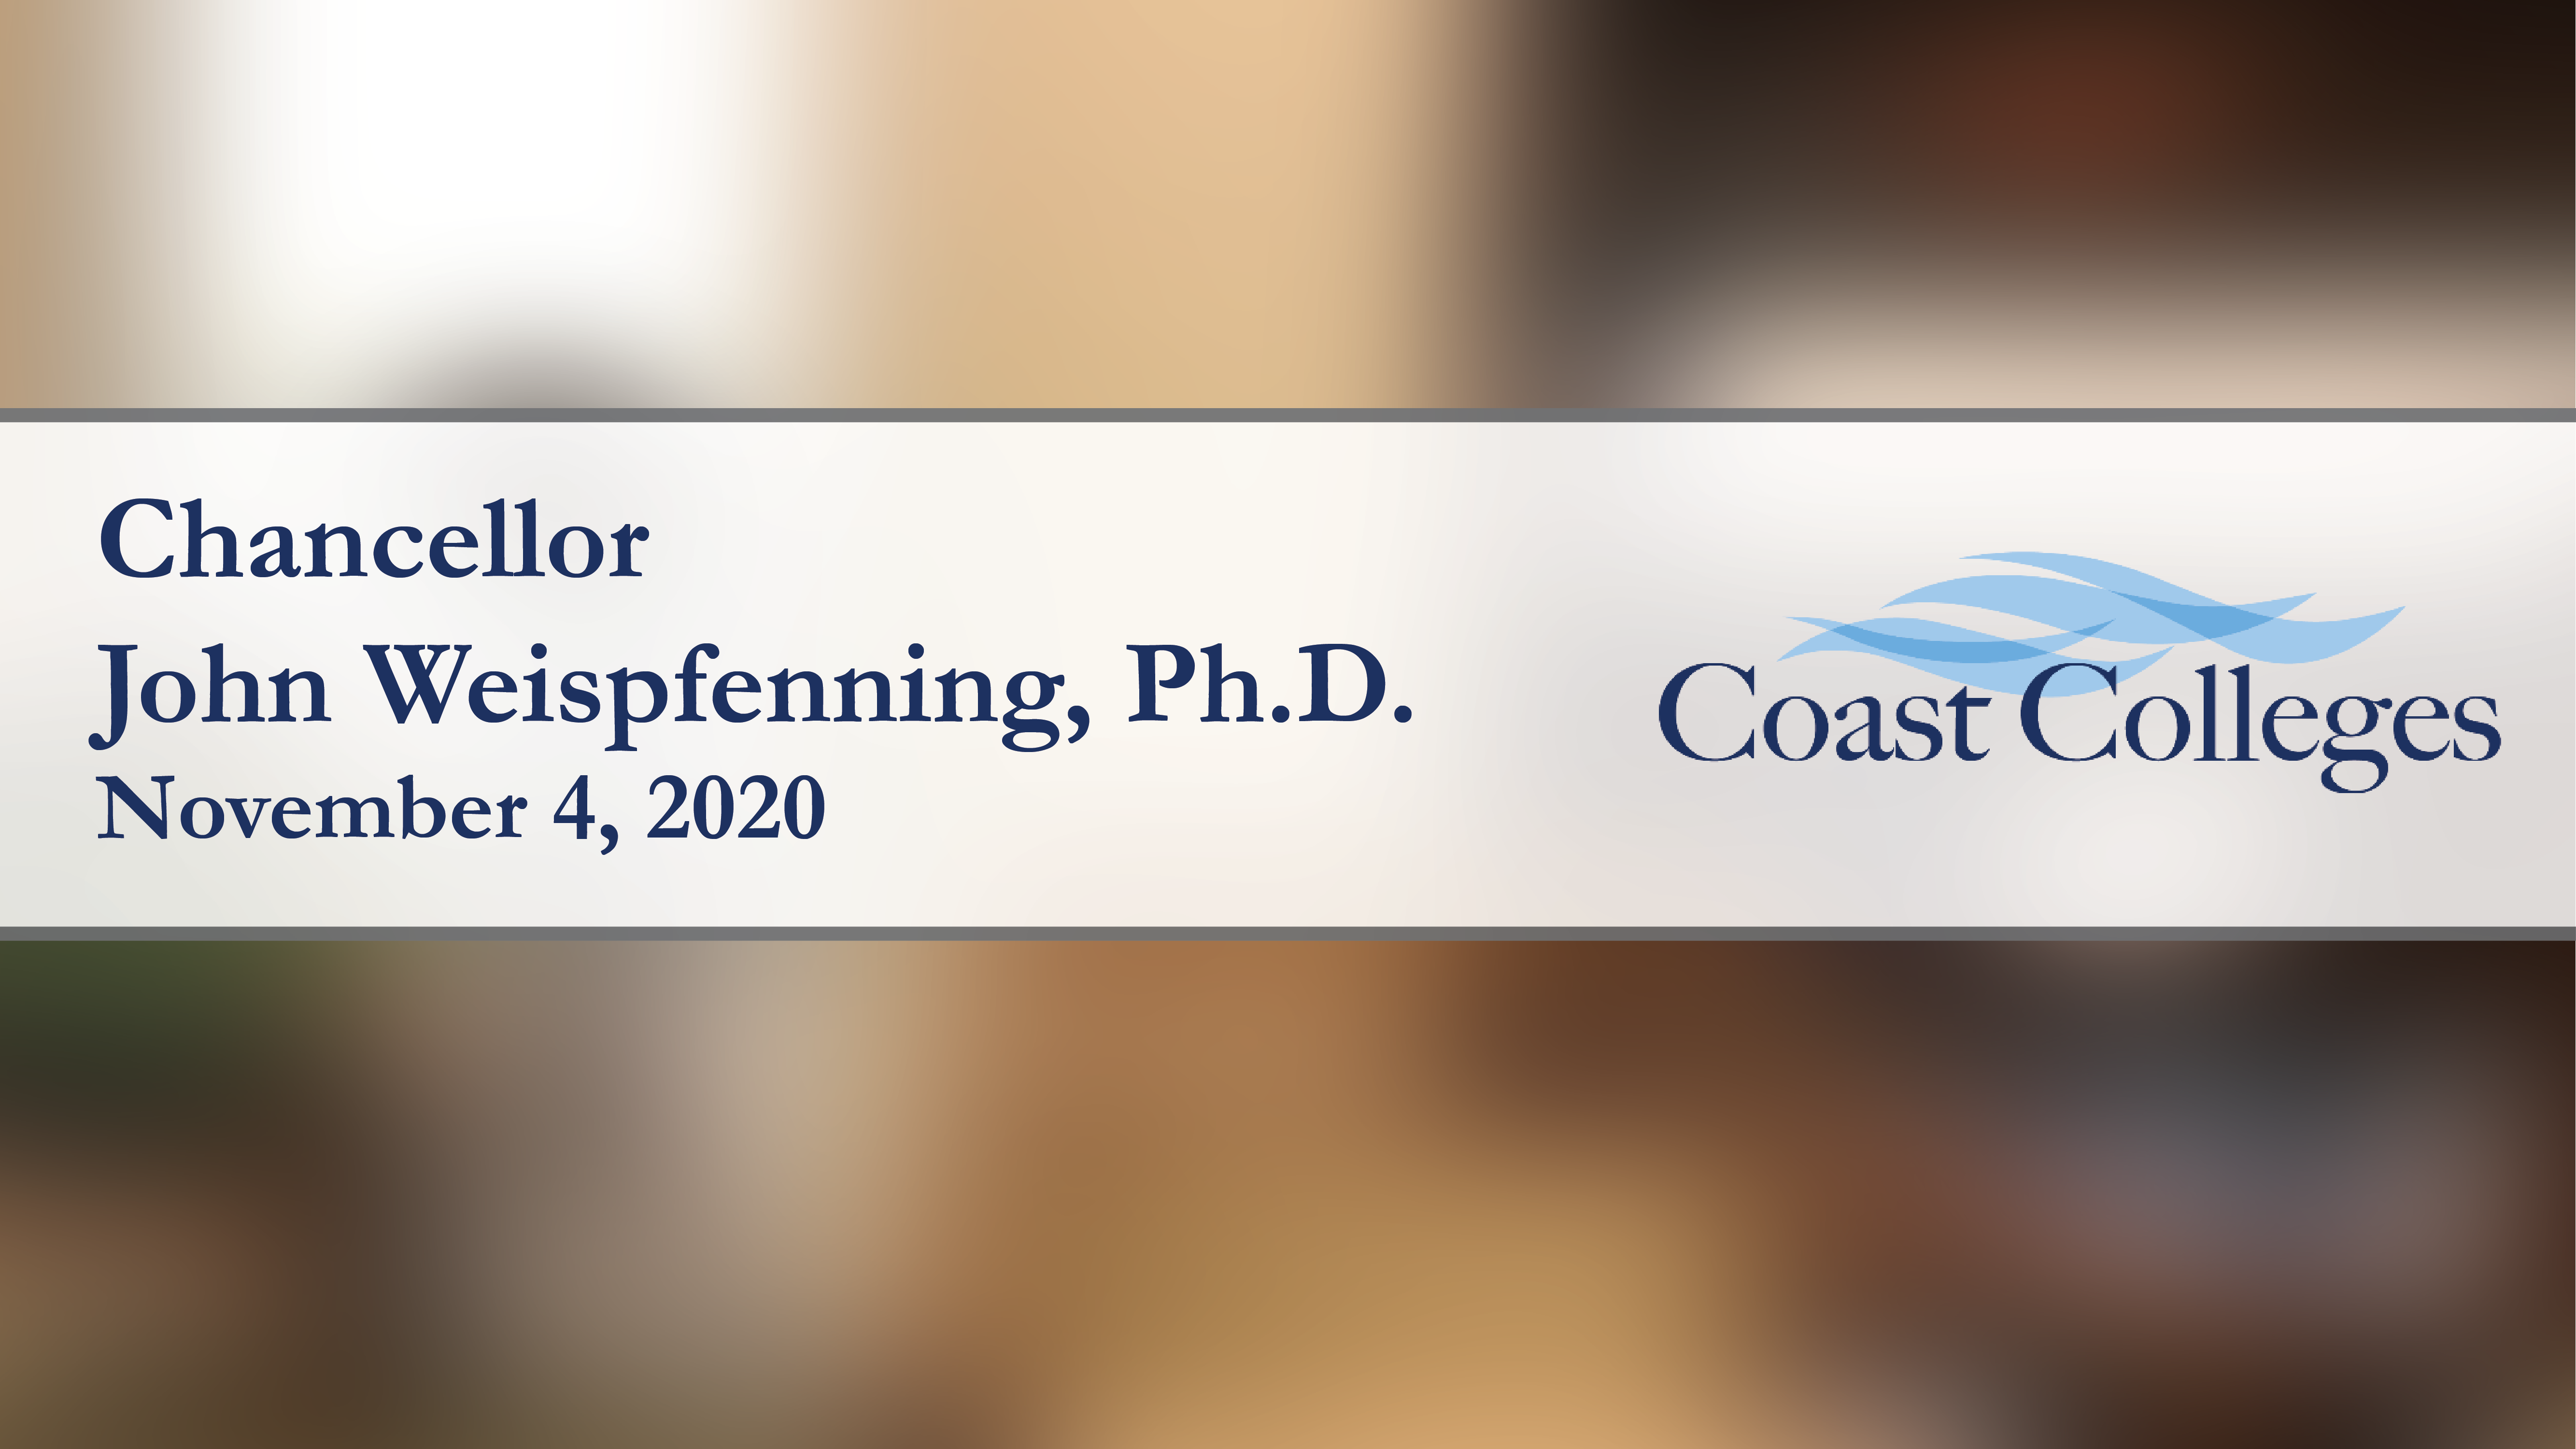 Blurred background of an office, the name Chancellor John Weispfenning, Ph.D., the date November 4, 2020, and the Coast Colleges logo with those words over blue waves